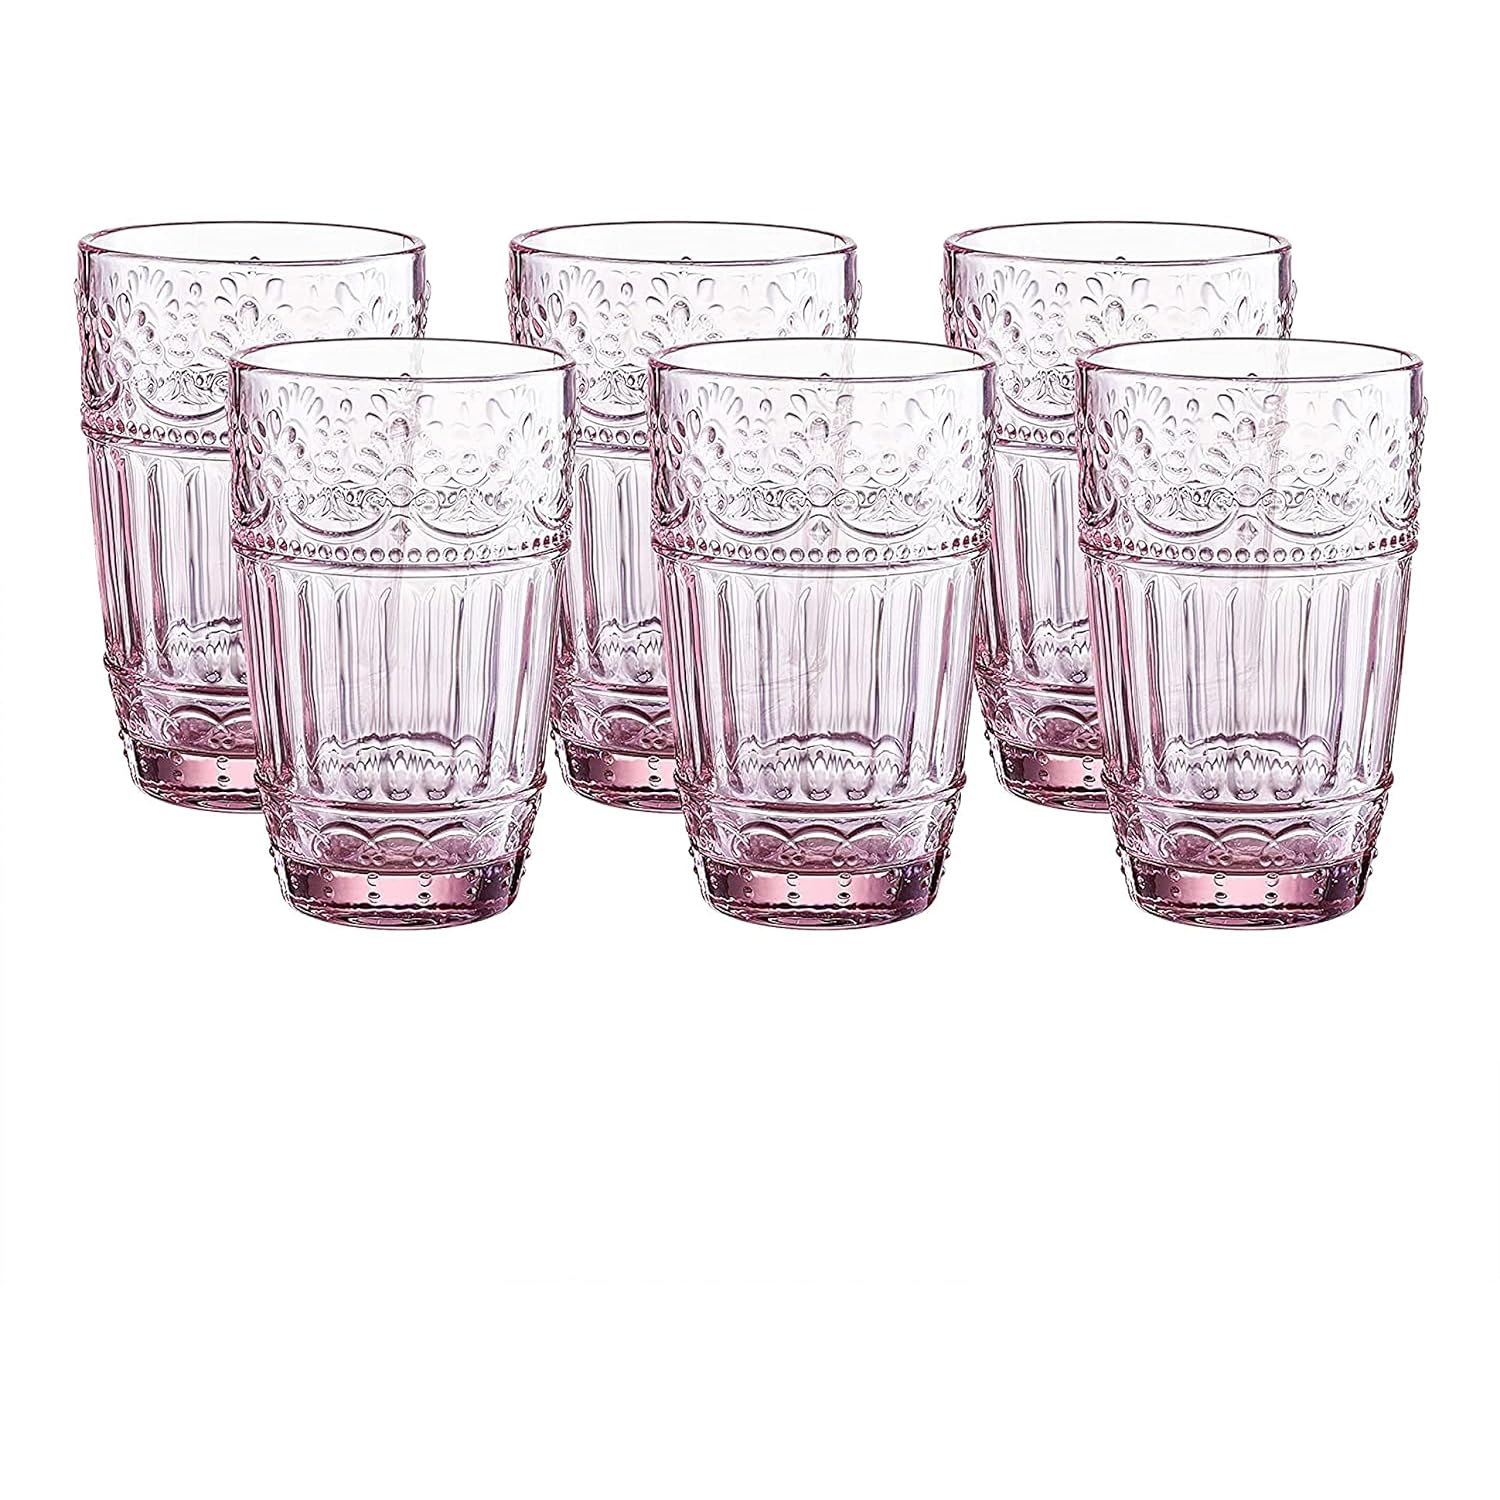 WHOLE HOUSEWARES Vintage Drinking Glasses - Set of 6 Embossed Water Glasses - 11oz Pink Glass Tumblers - Glassware Set for Water, Iced Tea, or Juice - Ideal for Weddings or Casual Dinner